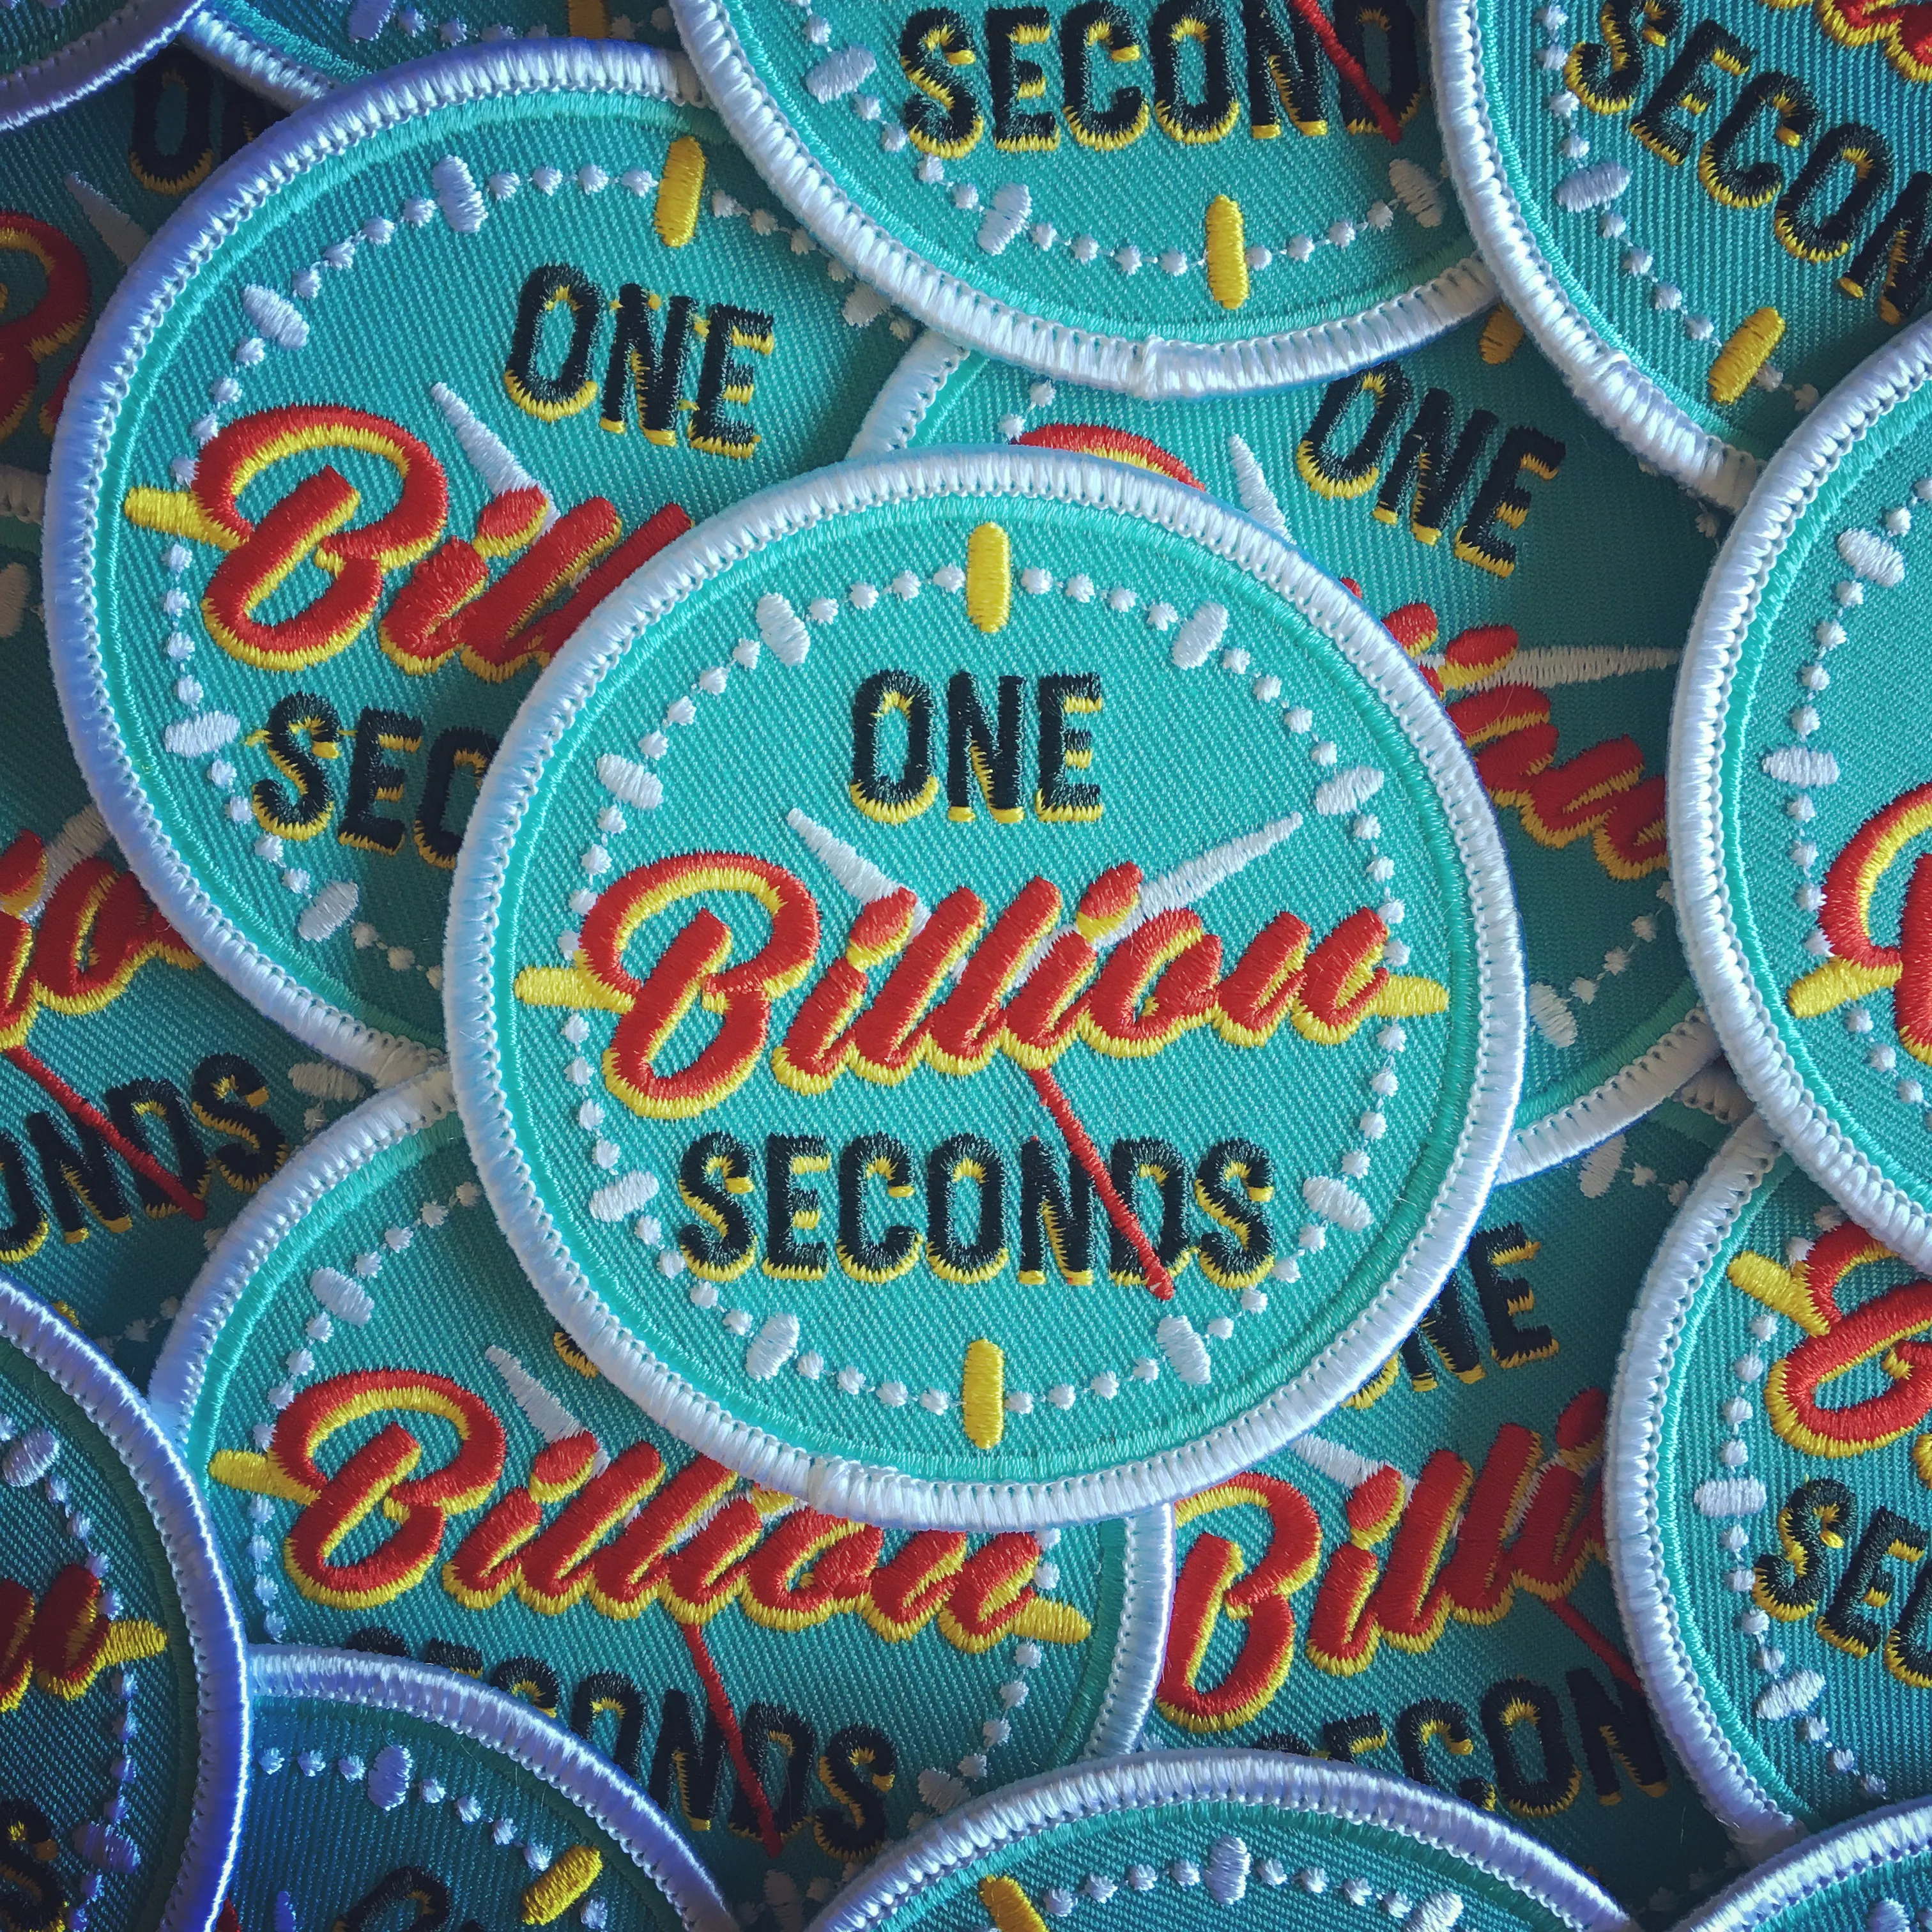 Embroidered Patch - One Billion Seconds